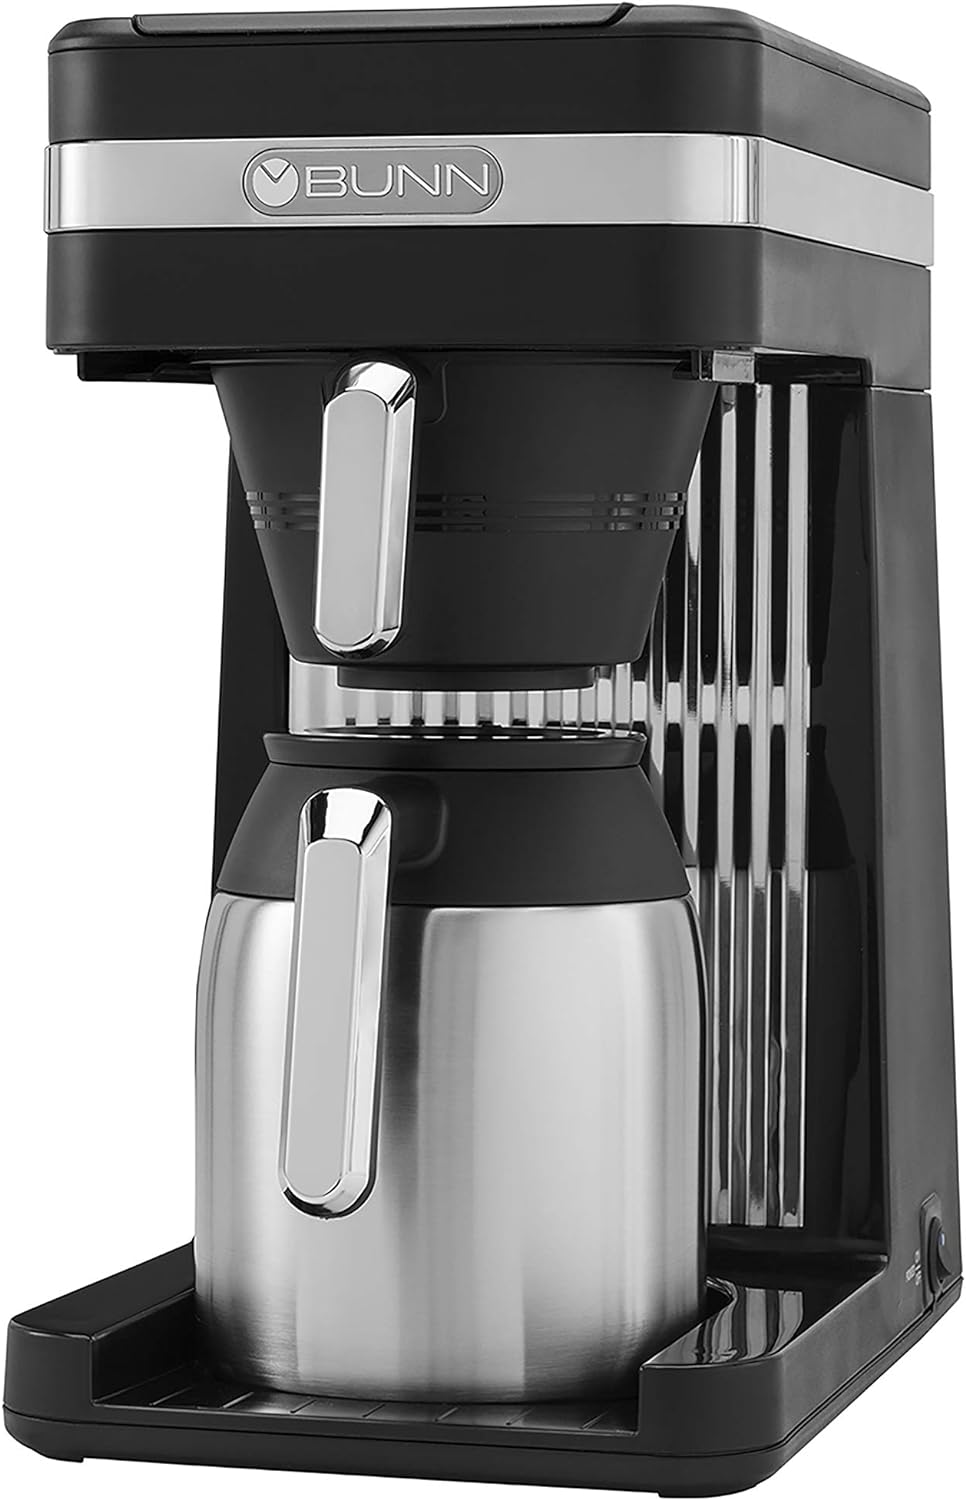 Bunn 55200 Csb3T Speed Brew Platinum Thermal Coffee Maker Stainless Steel, 10-Cup, Black